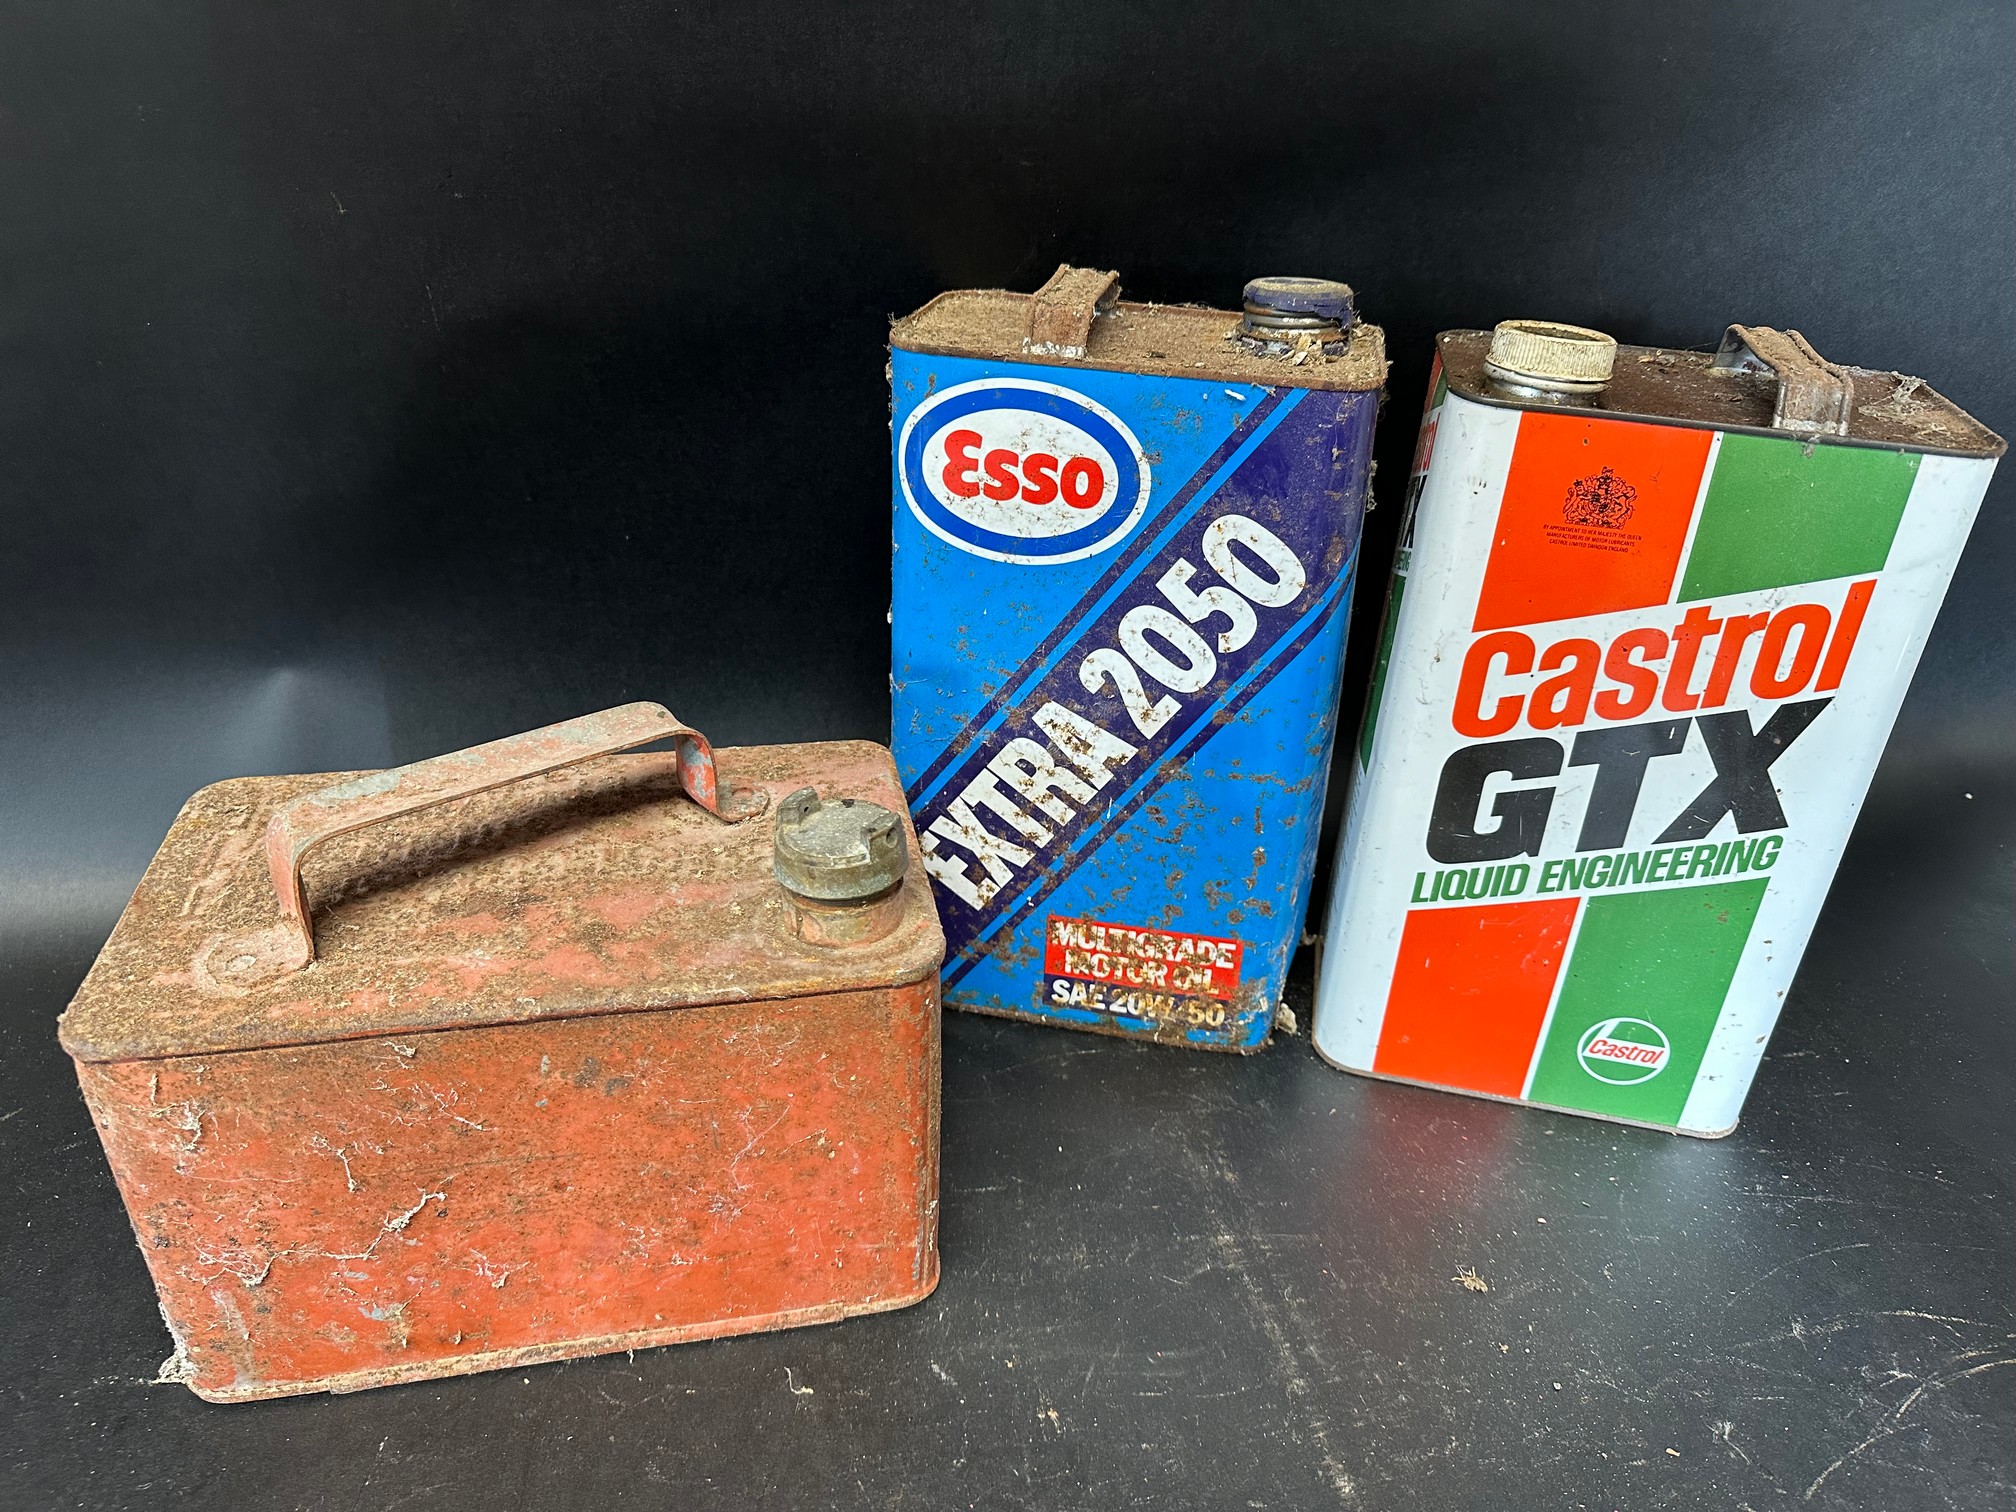 A Castrol GTX 5 litre can, an Esso Extra 2050 similar and a one gallon can with plain cap.